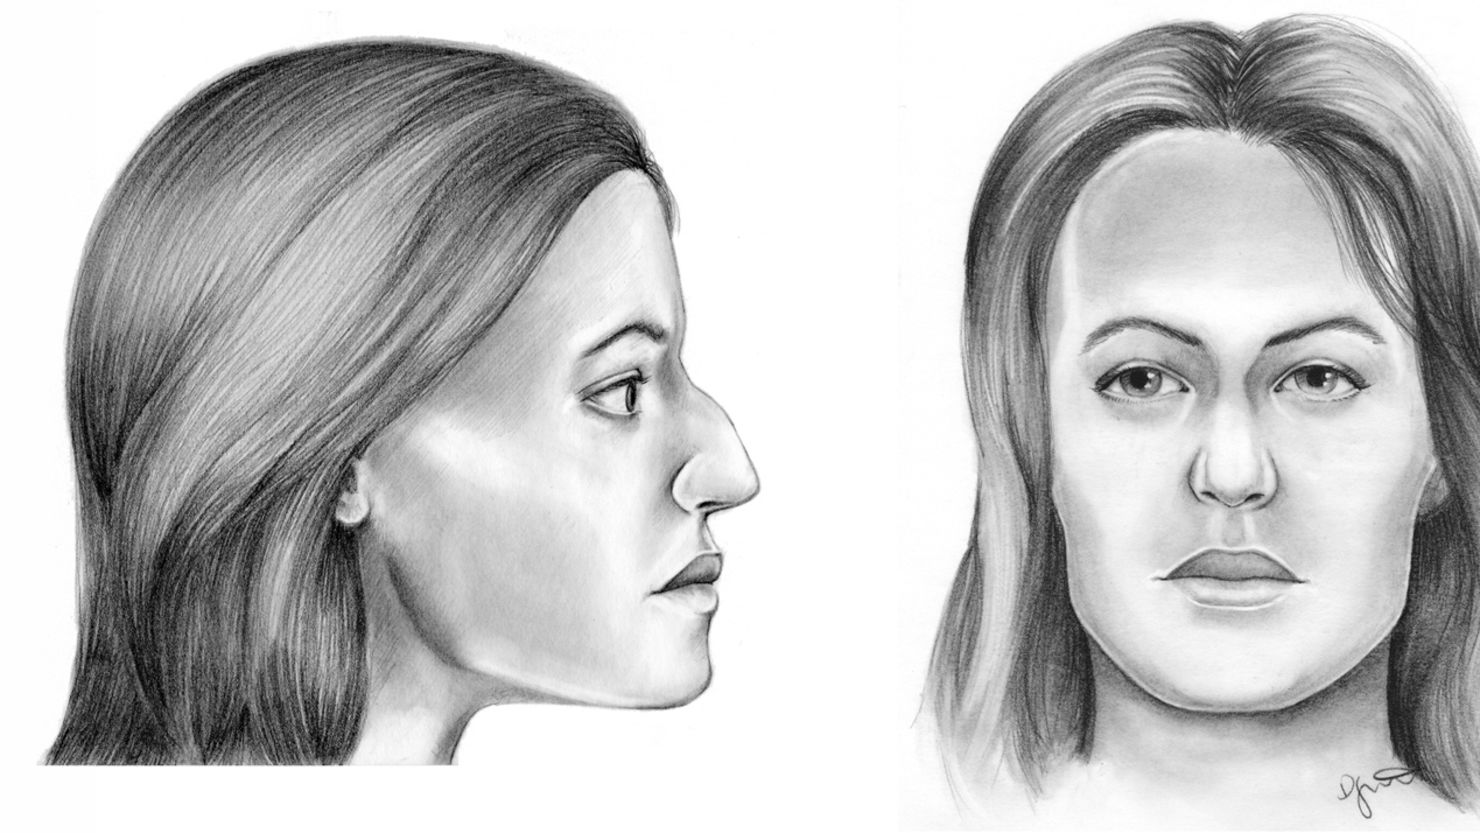 This sketch portrays a victim described as Caucasian, about 5-feet-2 inches tall and between 18 and 35 years old.